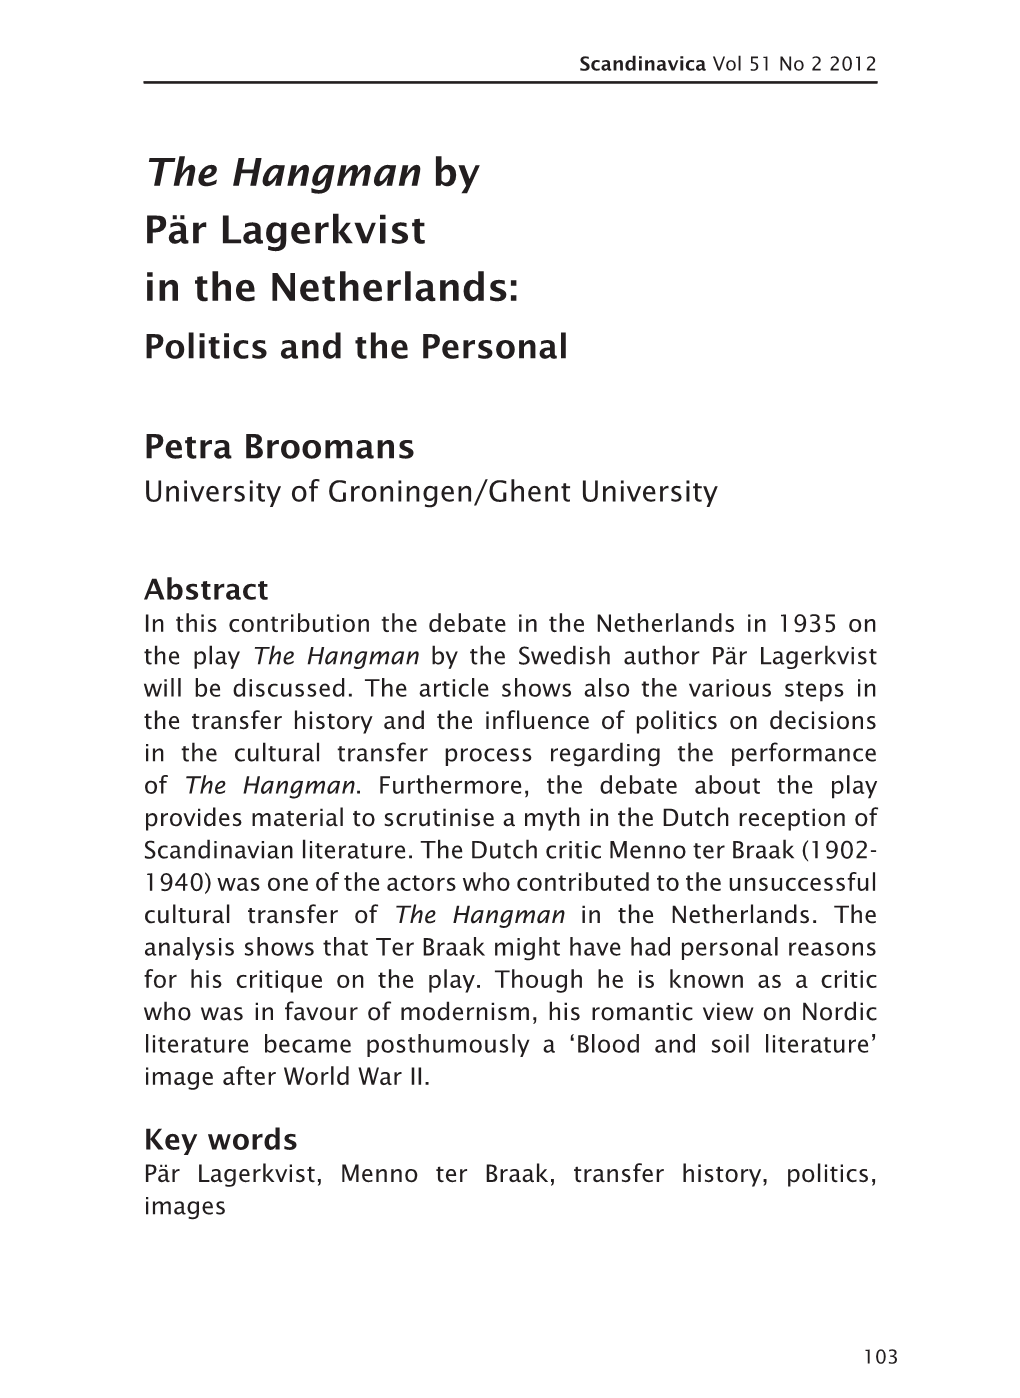 The Hangman by Pär Lagerkvist in the Netherlands: Politics and the Personal